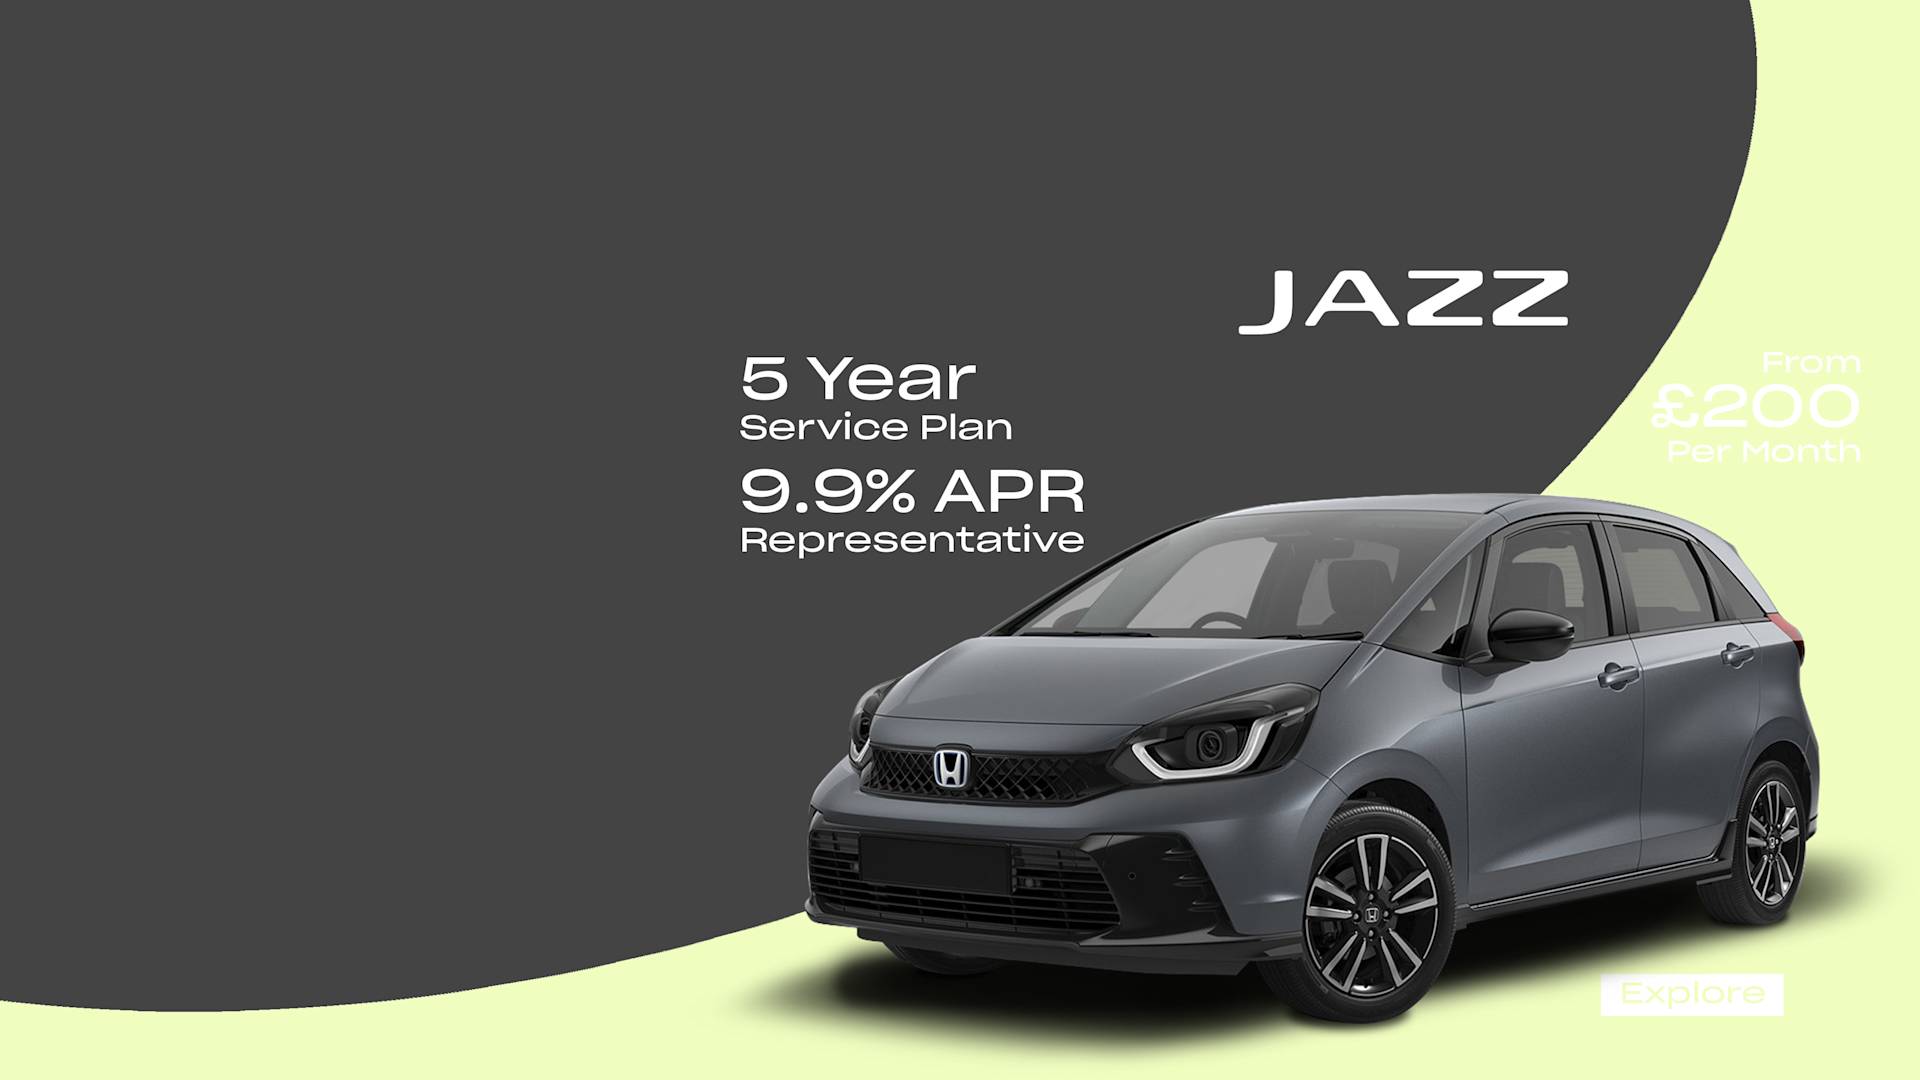 Jazz from £200 per month